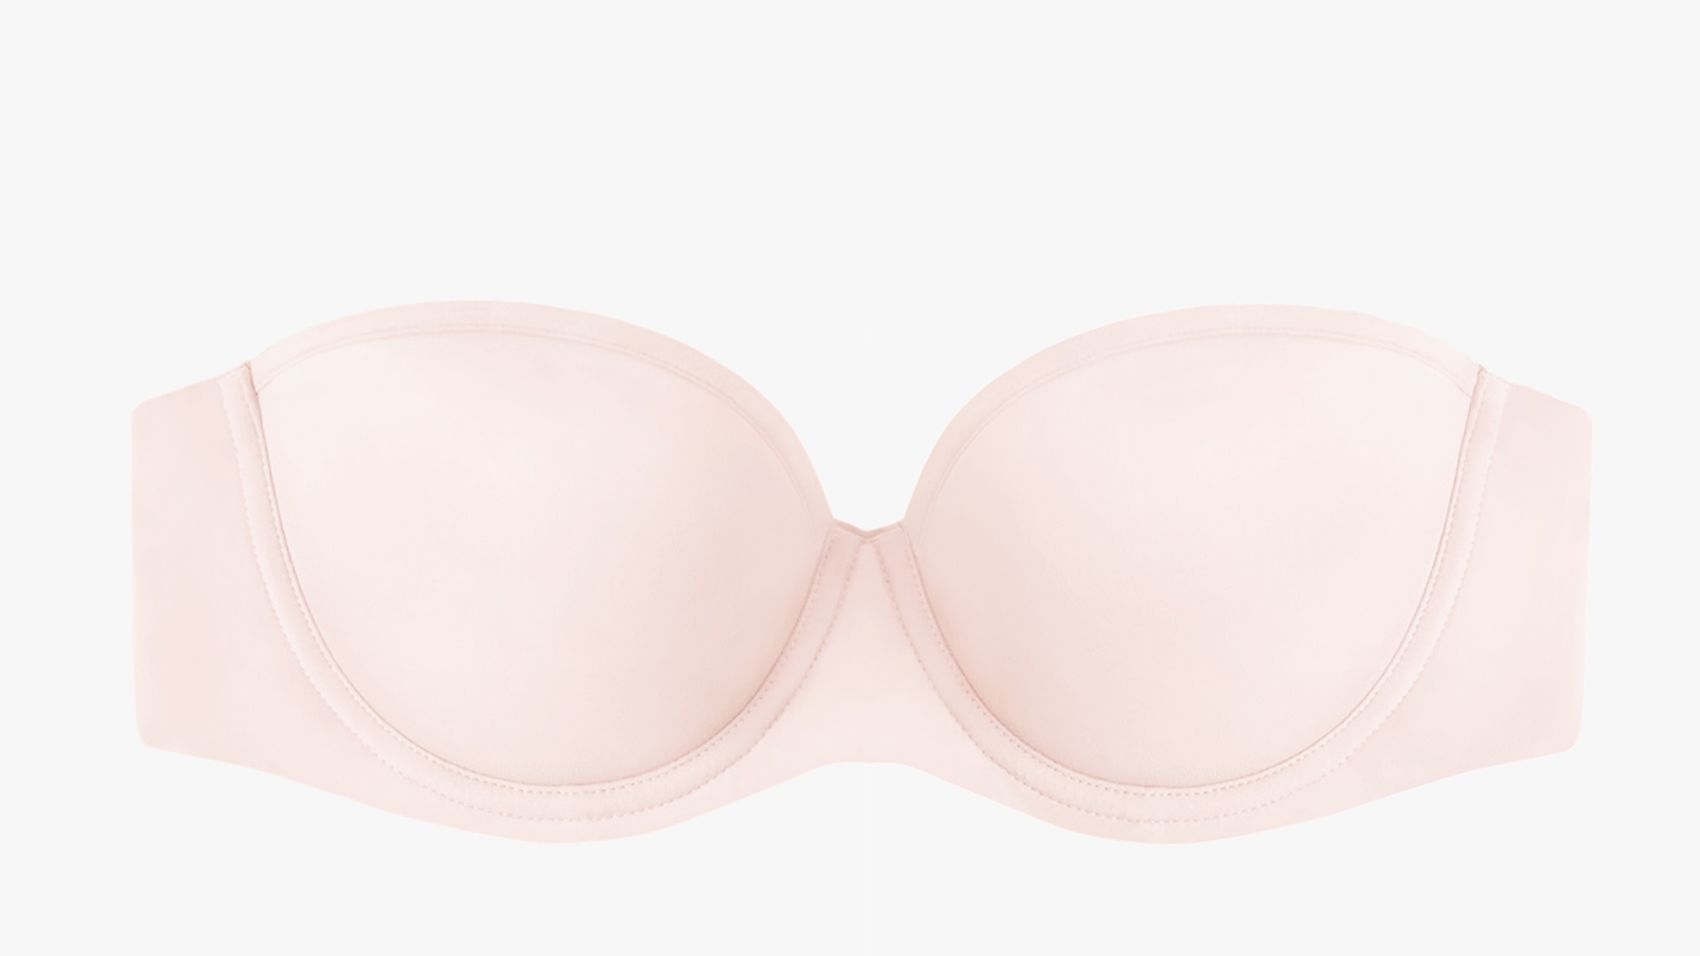 We tried the bra that thousands agree is the most comfortable on